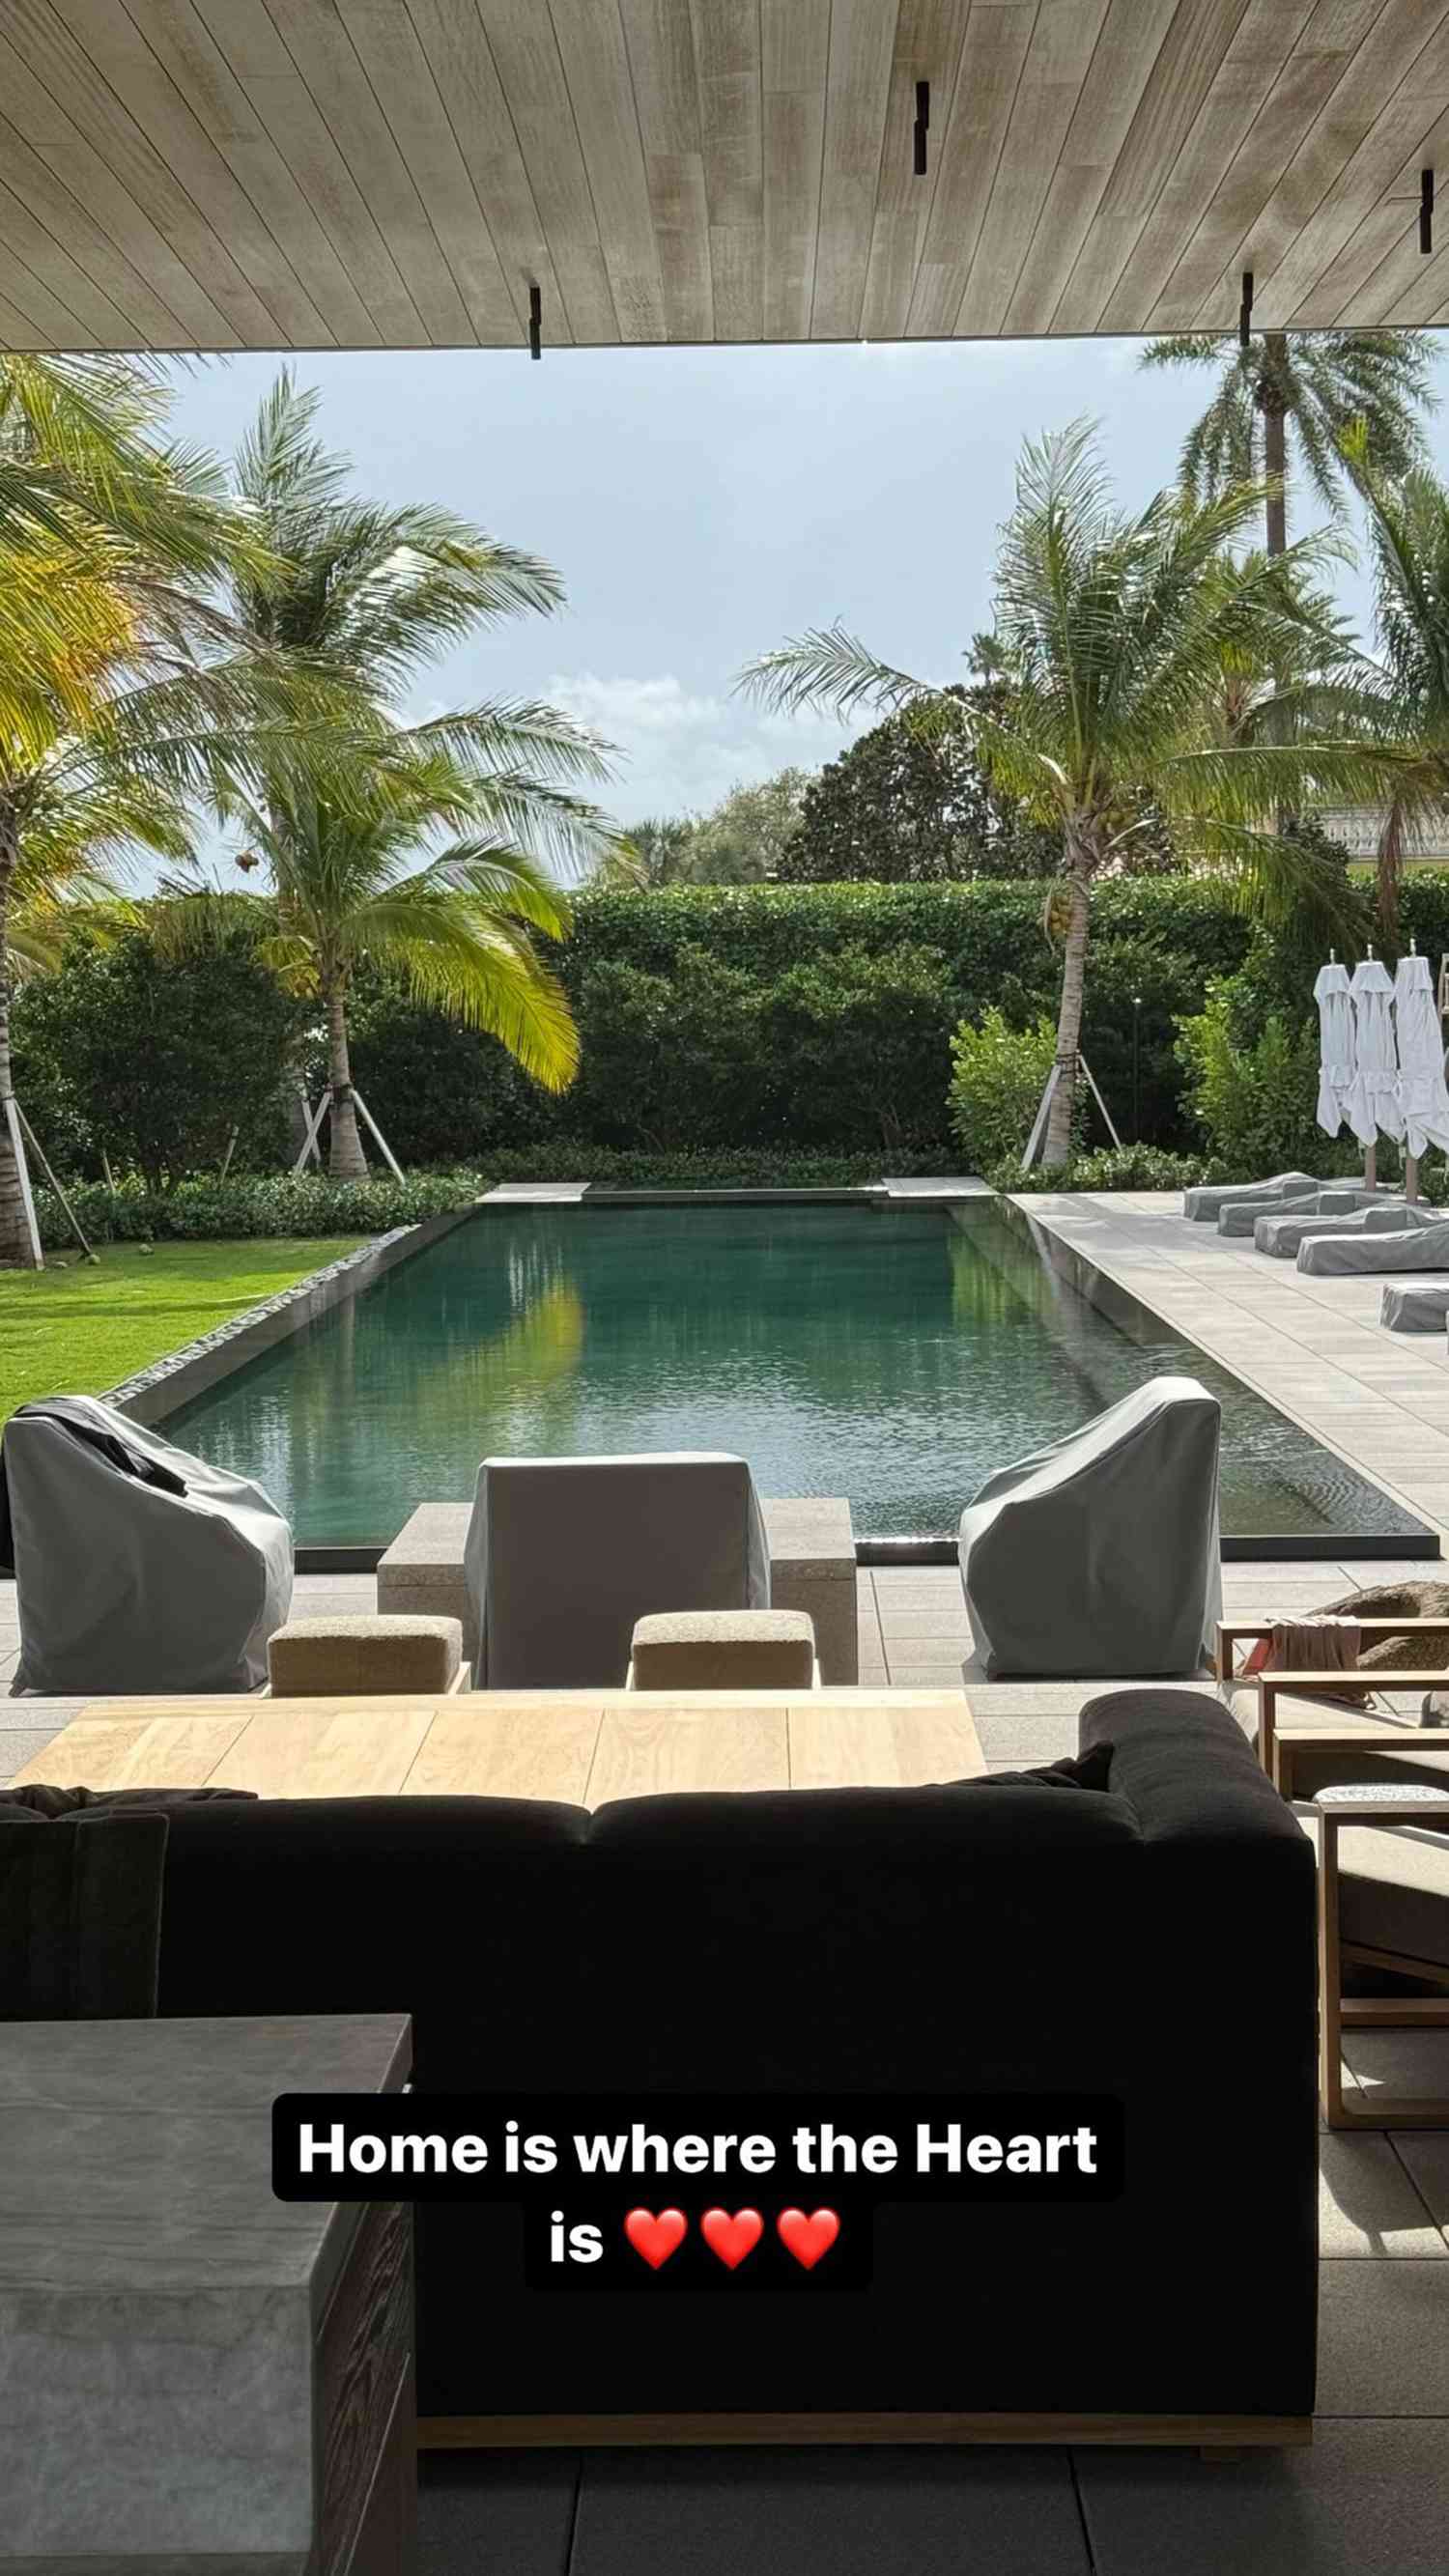 Tom Brady Shares Another Look at His Miami Bachelor Pad’s Stunning Backyard During Sunrise